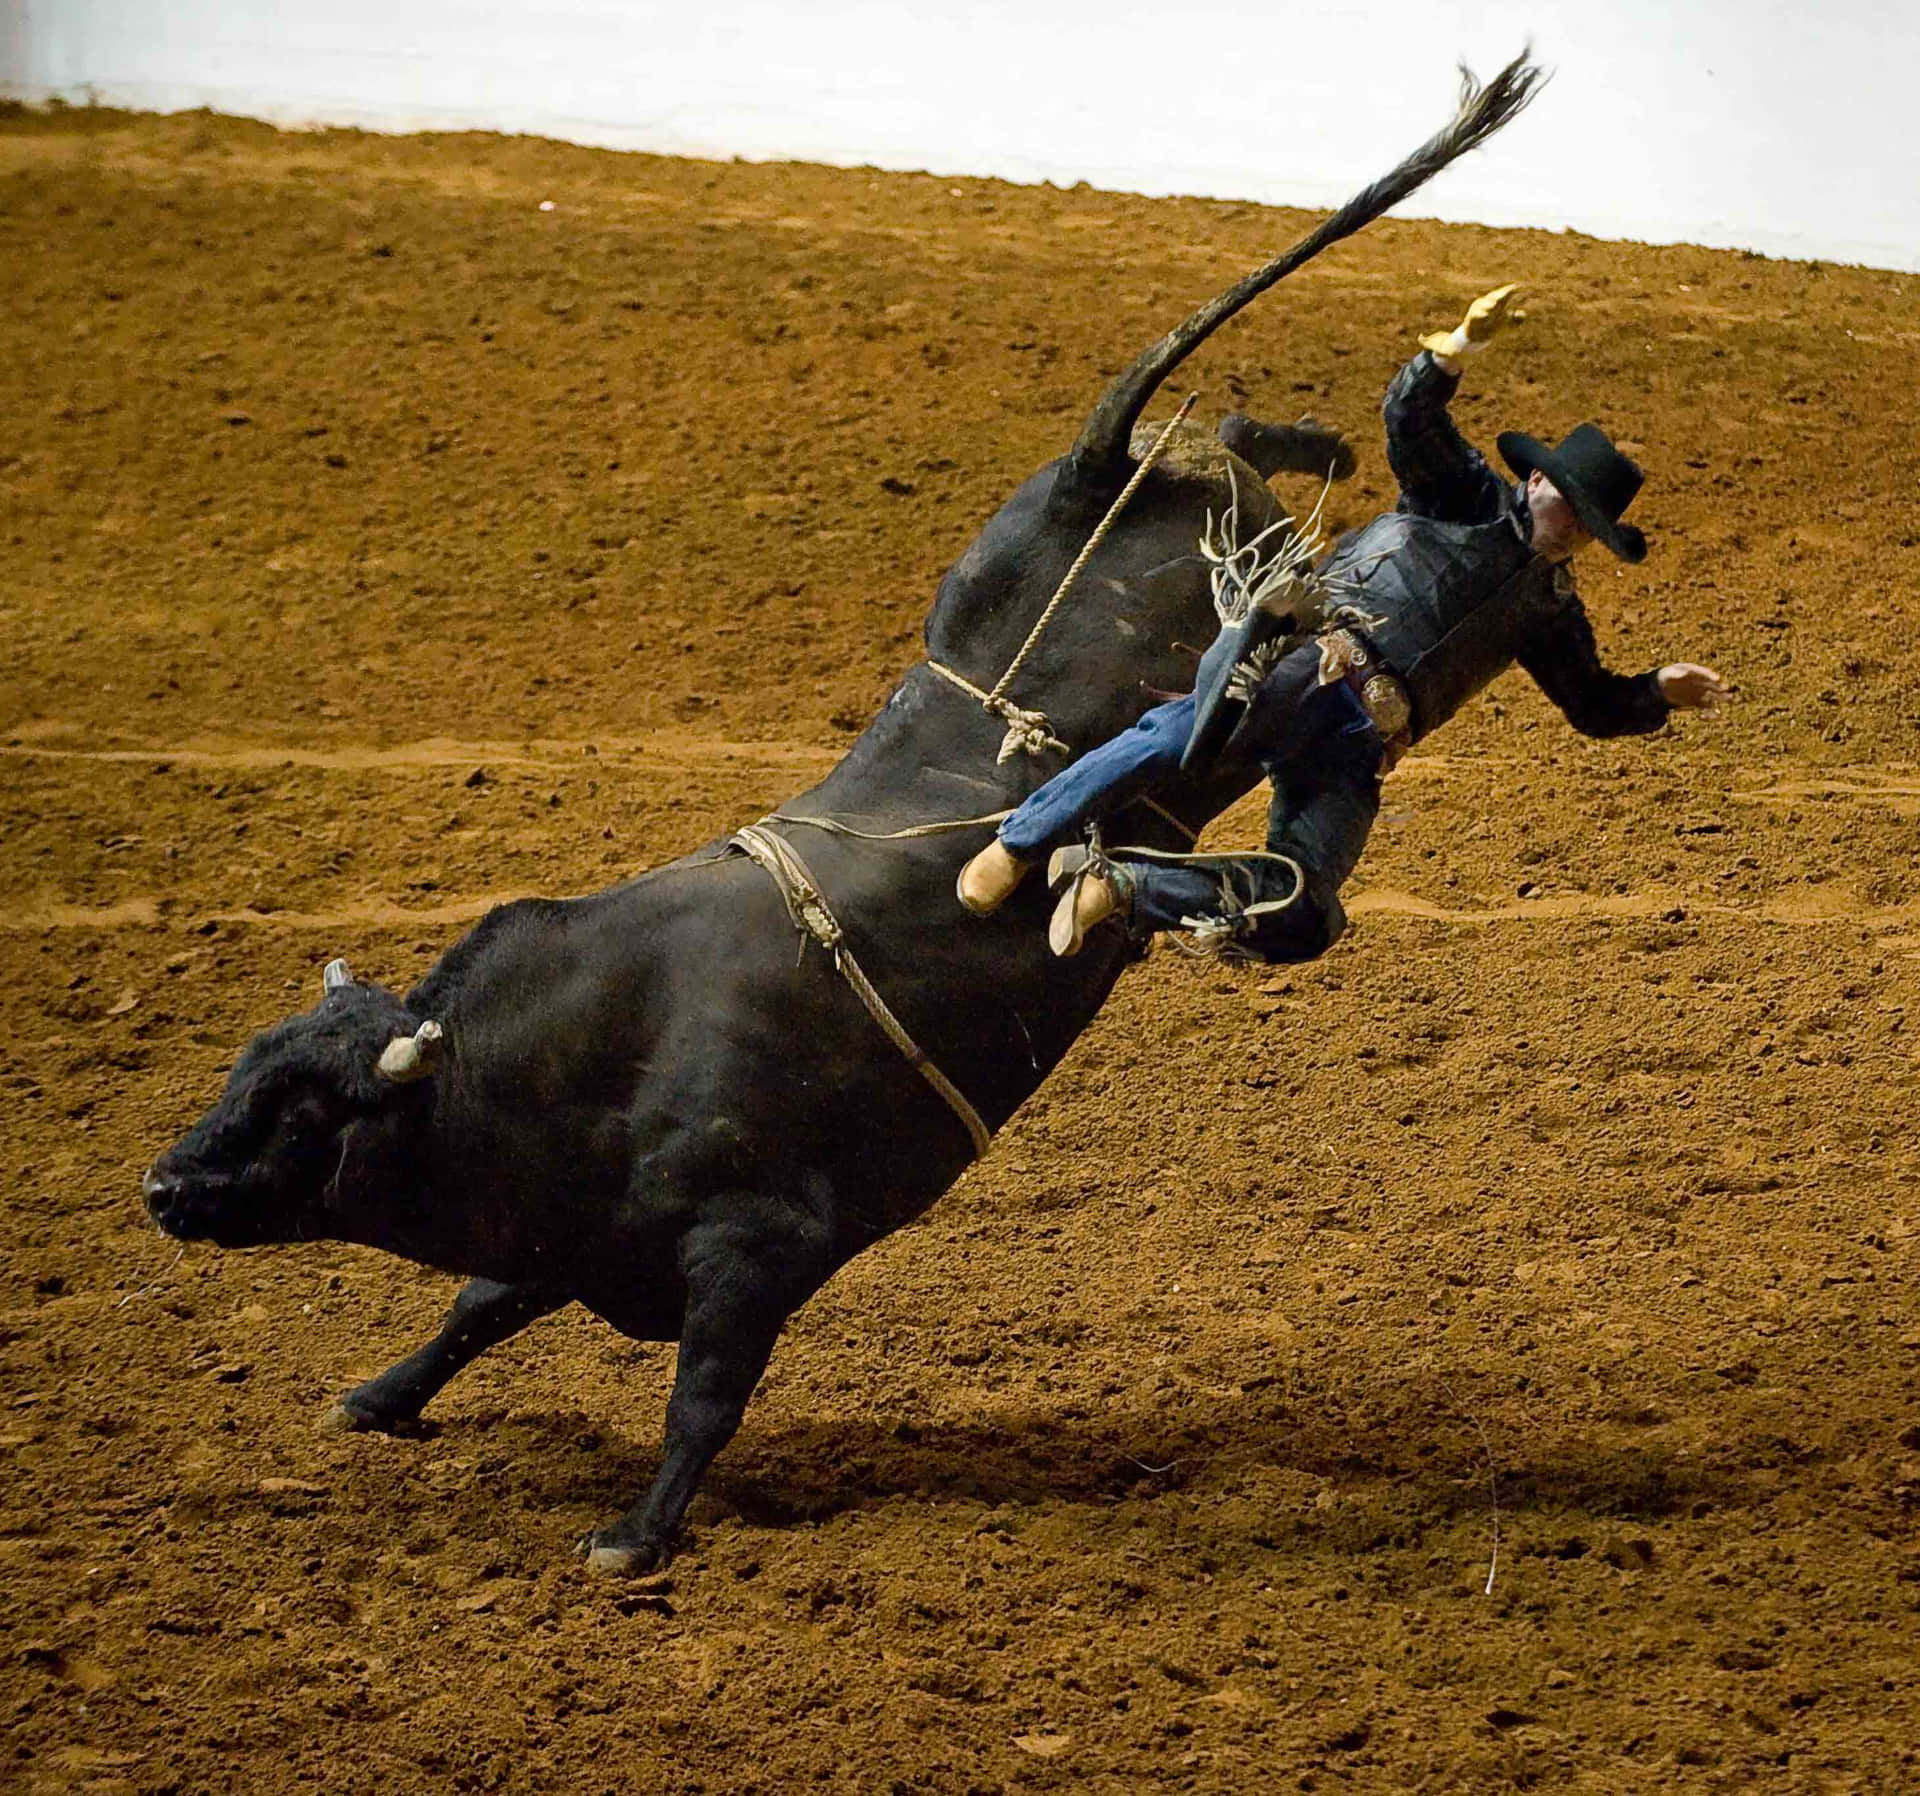 Image  Bull Riding at the Rodeo Wallpaper